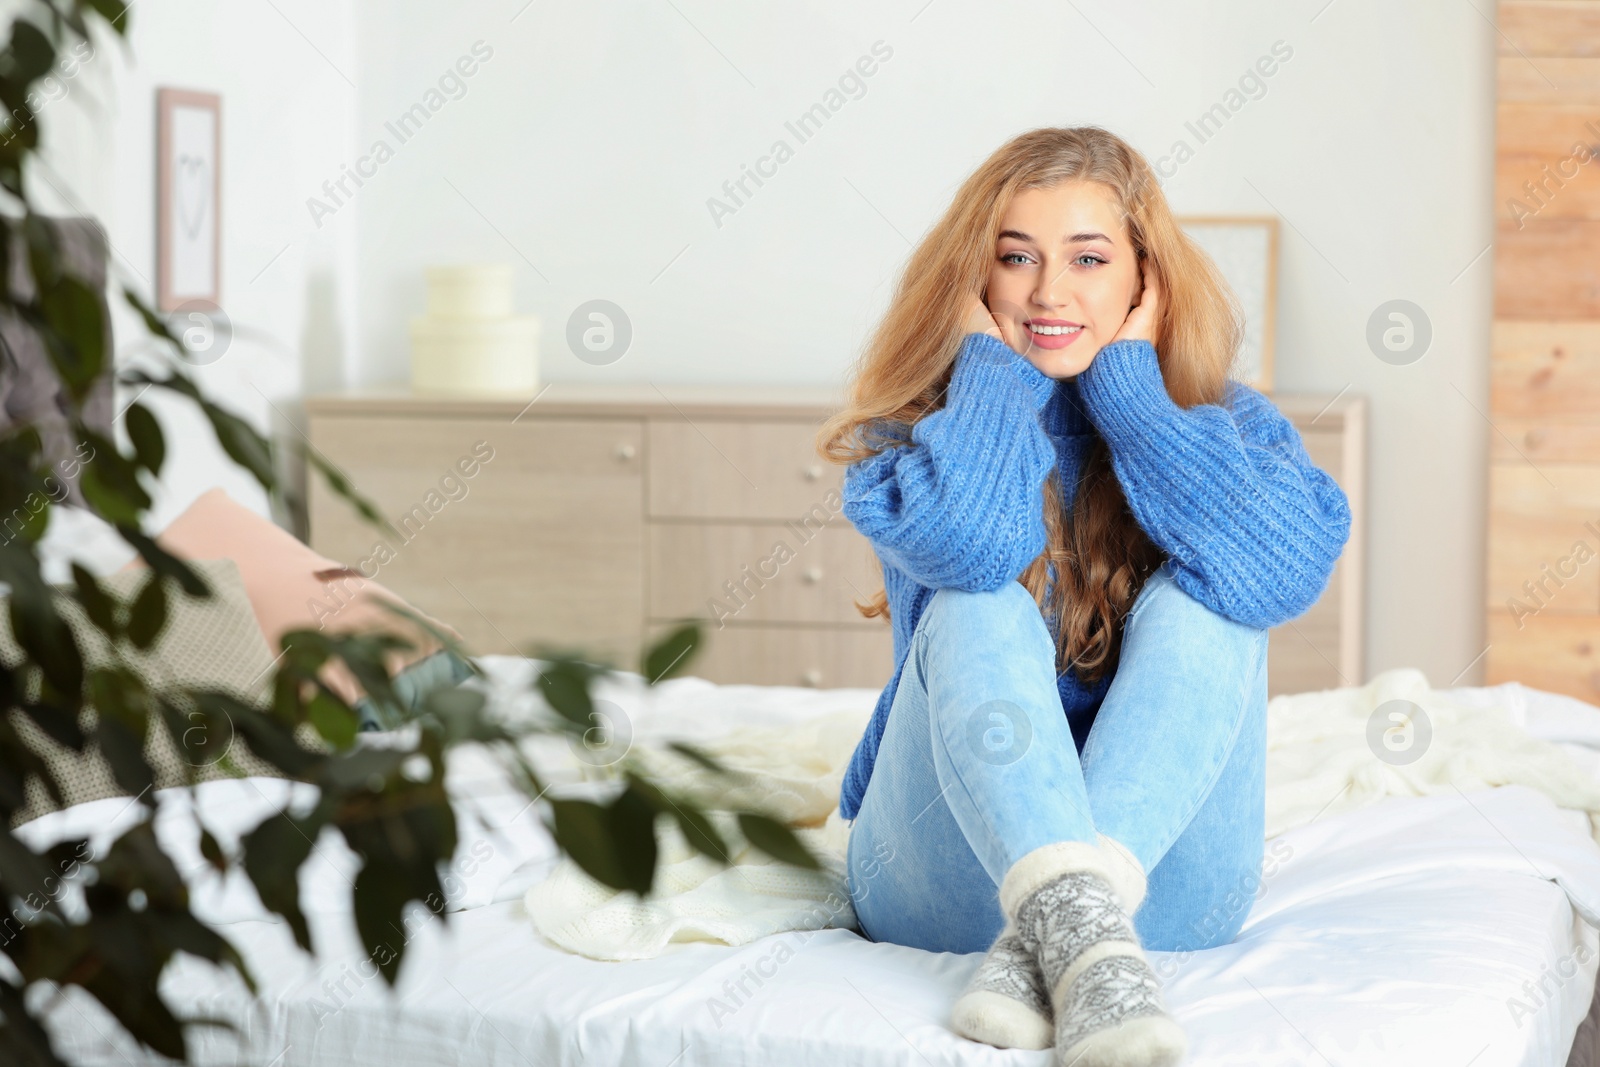 Photo of Beautiful smiling young woman in cozy warm sweater sitting on bed at home. Space for text